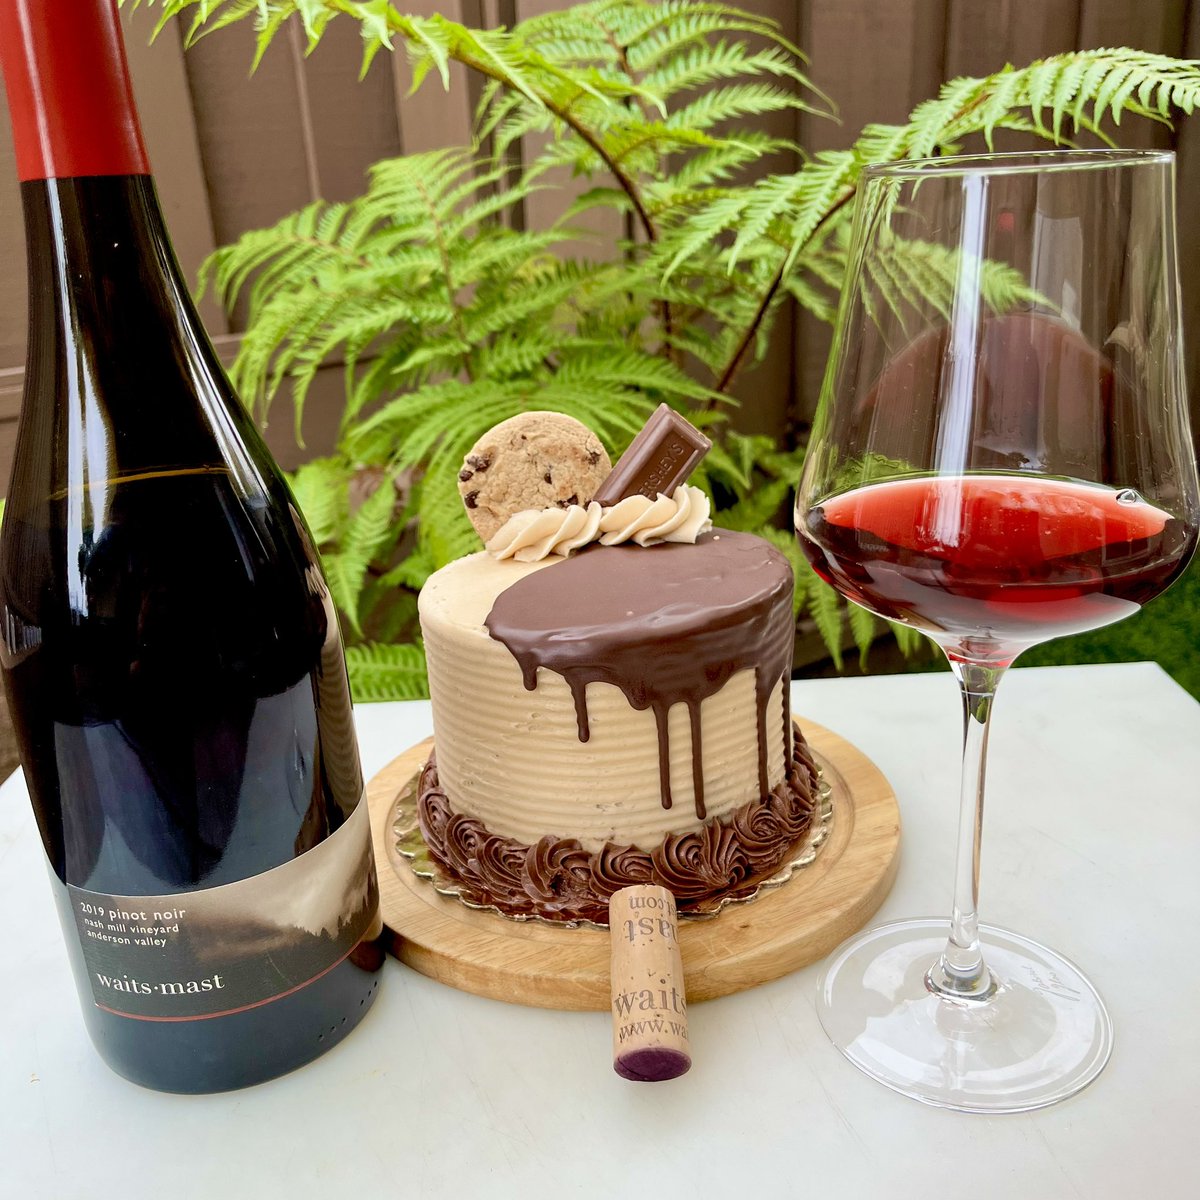 Happy #CakeDay with a @MendoWine pinot noir by @WaitsMast. This is showing a nose of black cherry, cinnamon and sandalwood with tastes of ripe black raspberry, clove and nutmeg.  This is truly a beautiful wine. @boozychef @JAndrewFlorezII @rr_pirate @AskRobY @katerina_brv